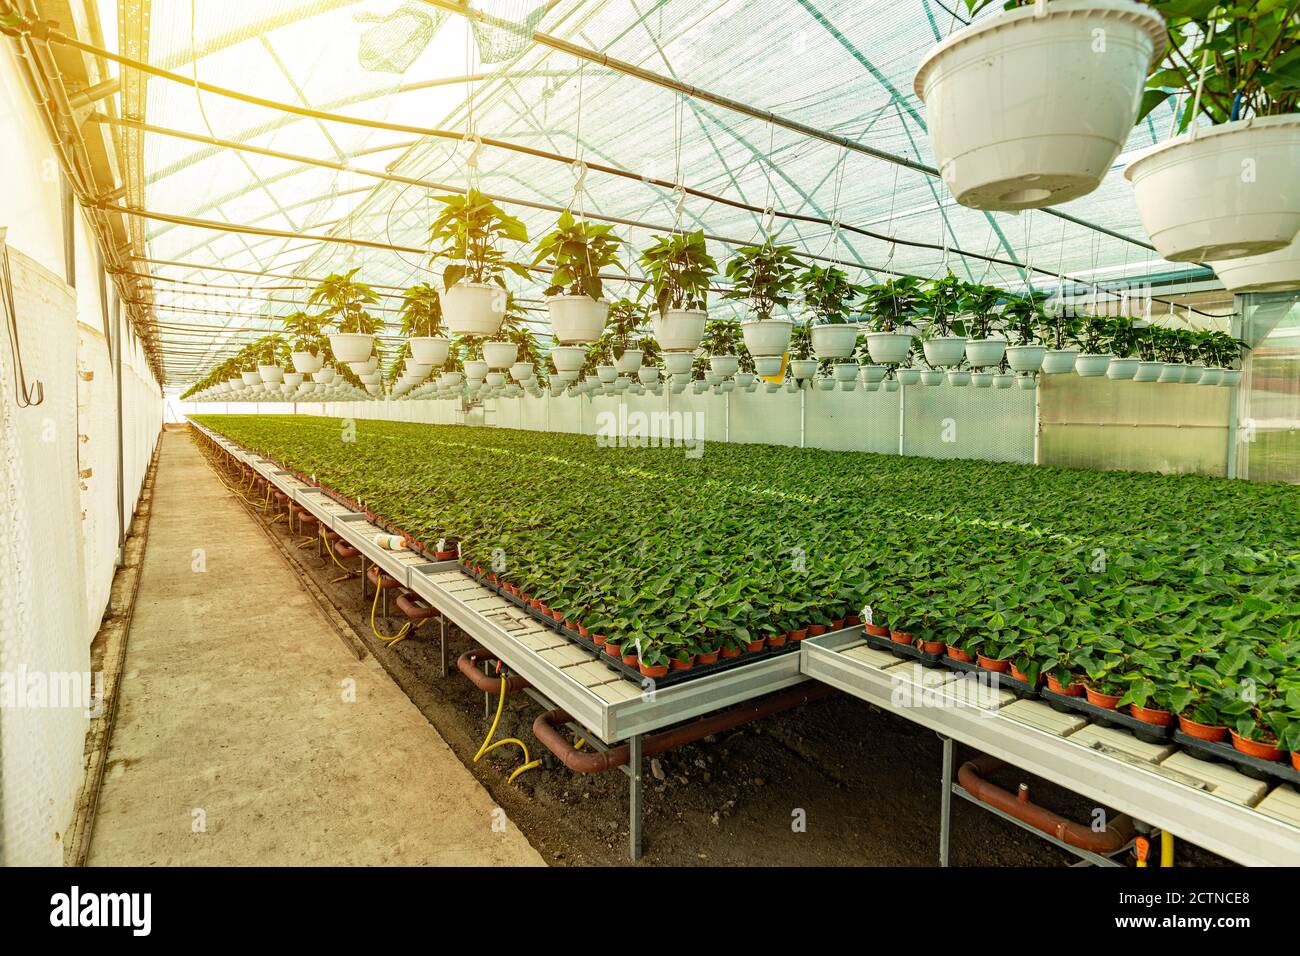 Modern hydroponic greenhouse with climate control system for cultivation of  ornamental plants Stock Photo - Alamy